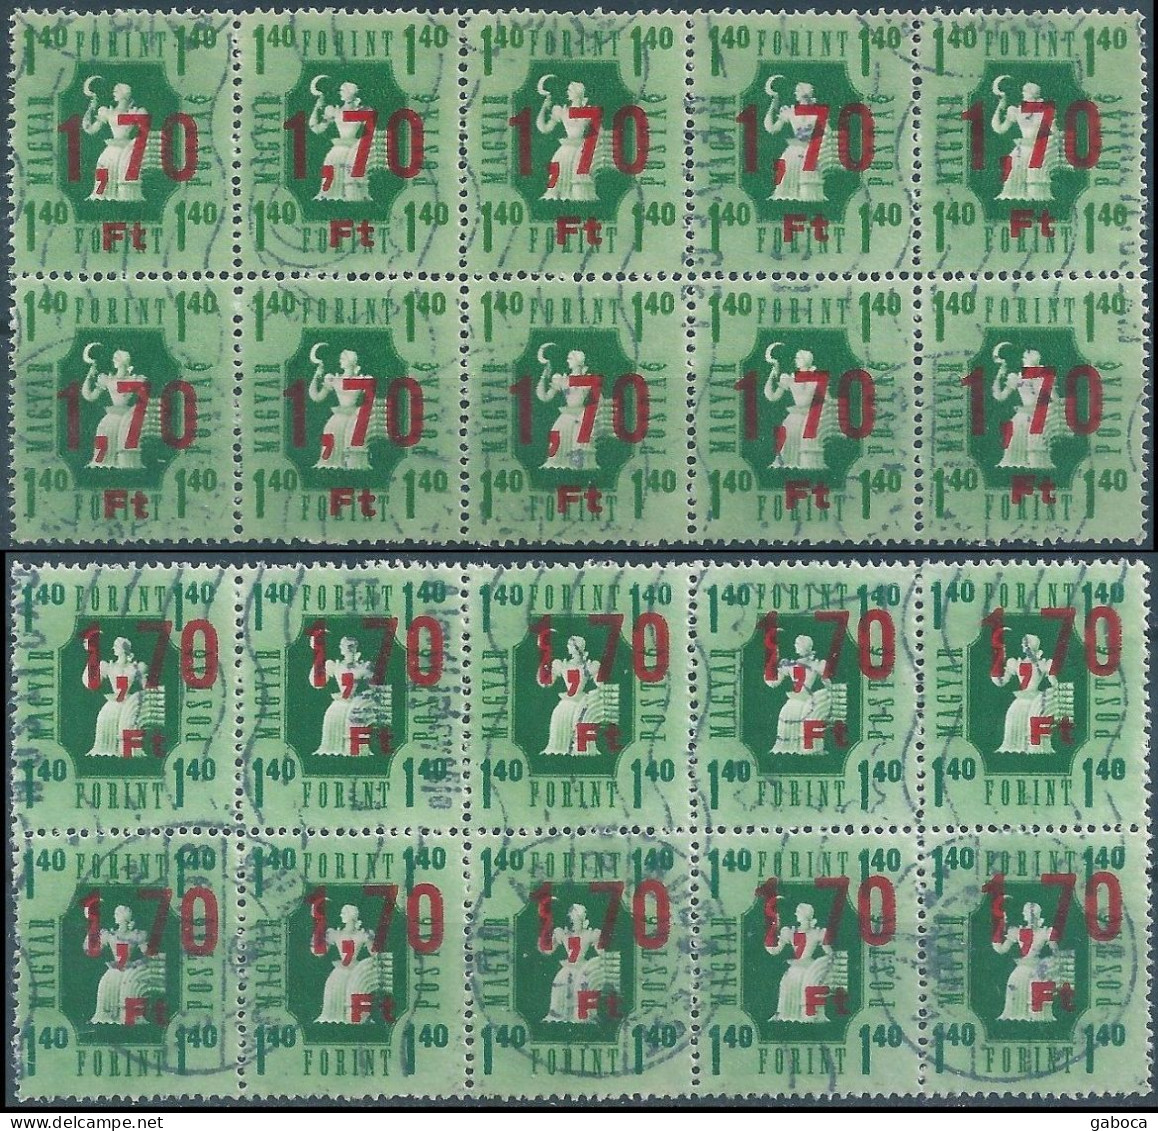 C5899 Hungary Parcel Stamp Agriculture Harvest Ovprnt Plate Block Of 10 Used 2xERROR - Post